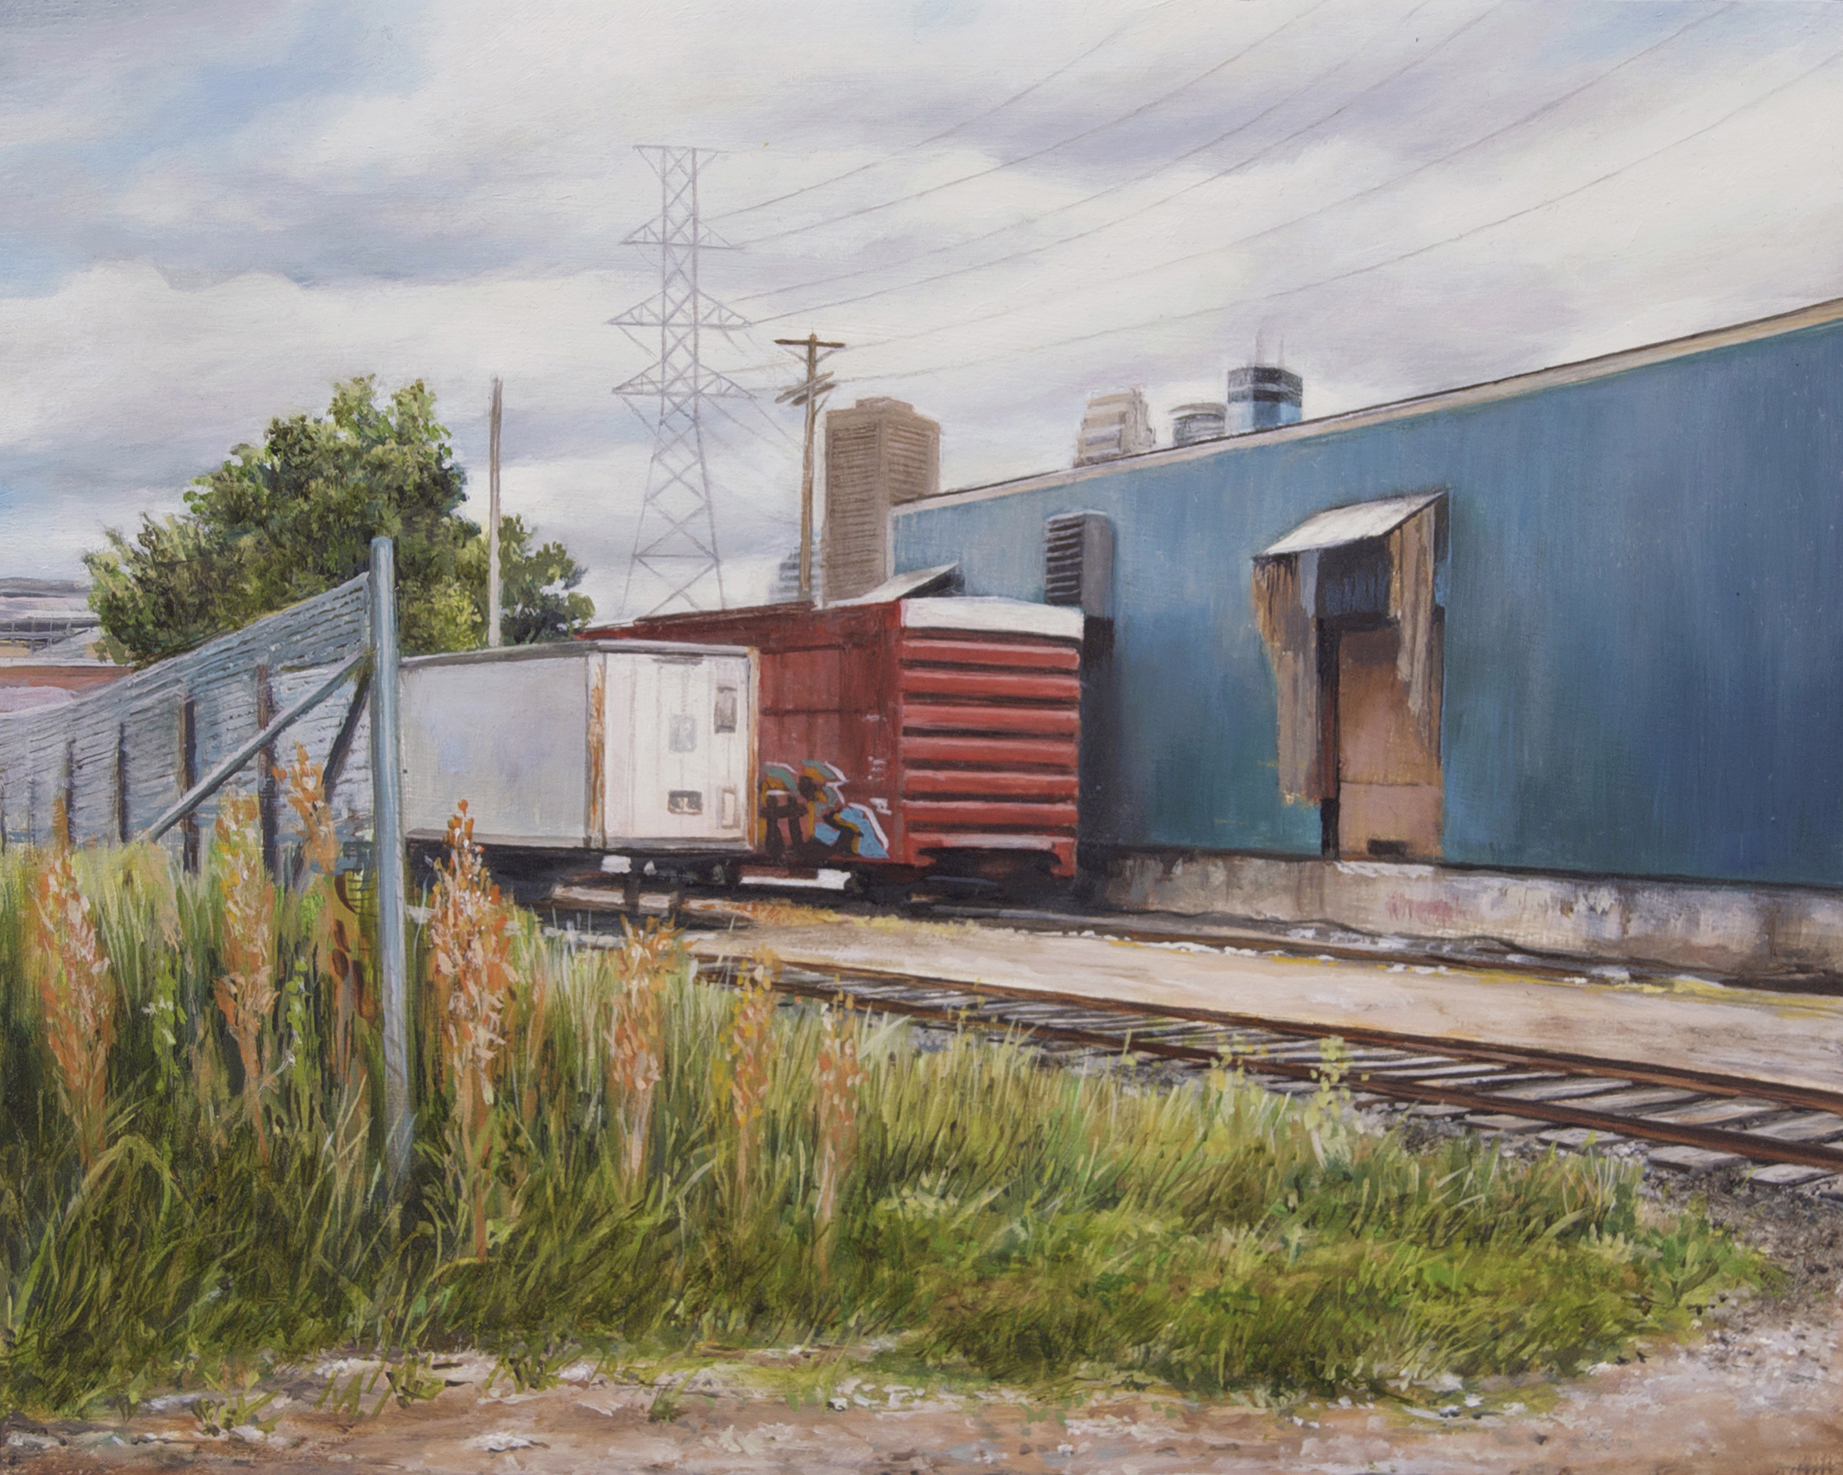   Train Cars at North Irving     Avenue, Minneapolis   2014  Oil on panel  8 x 10 inches    